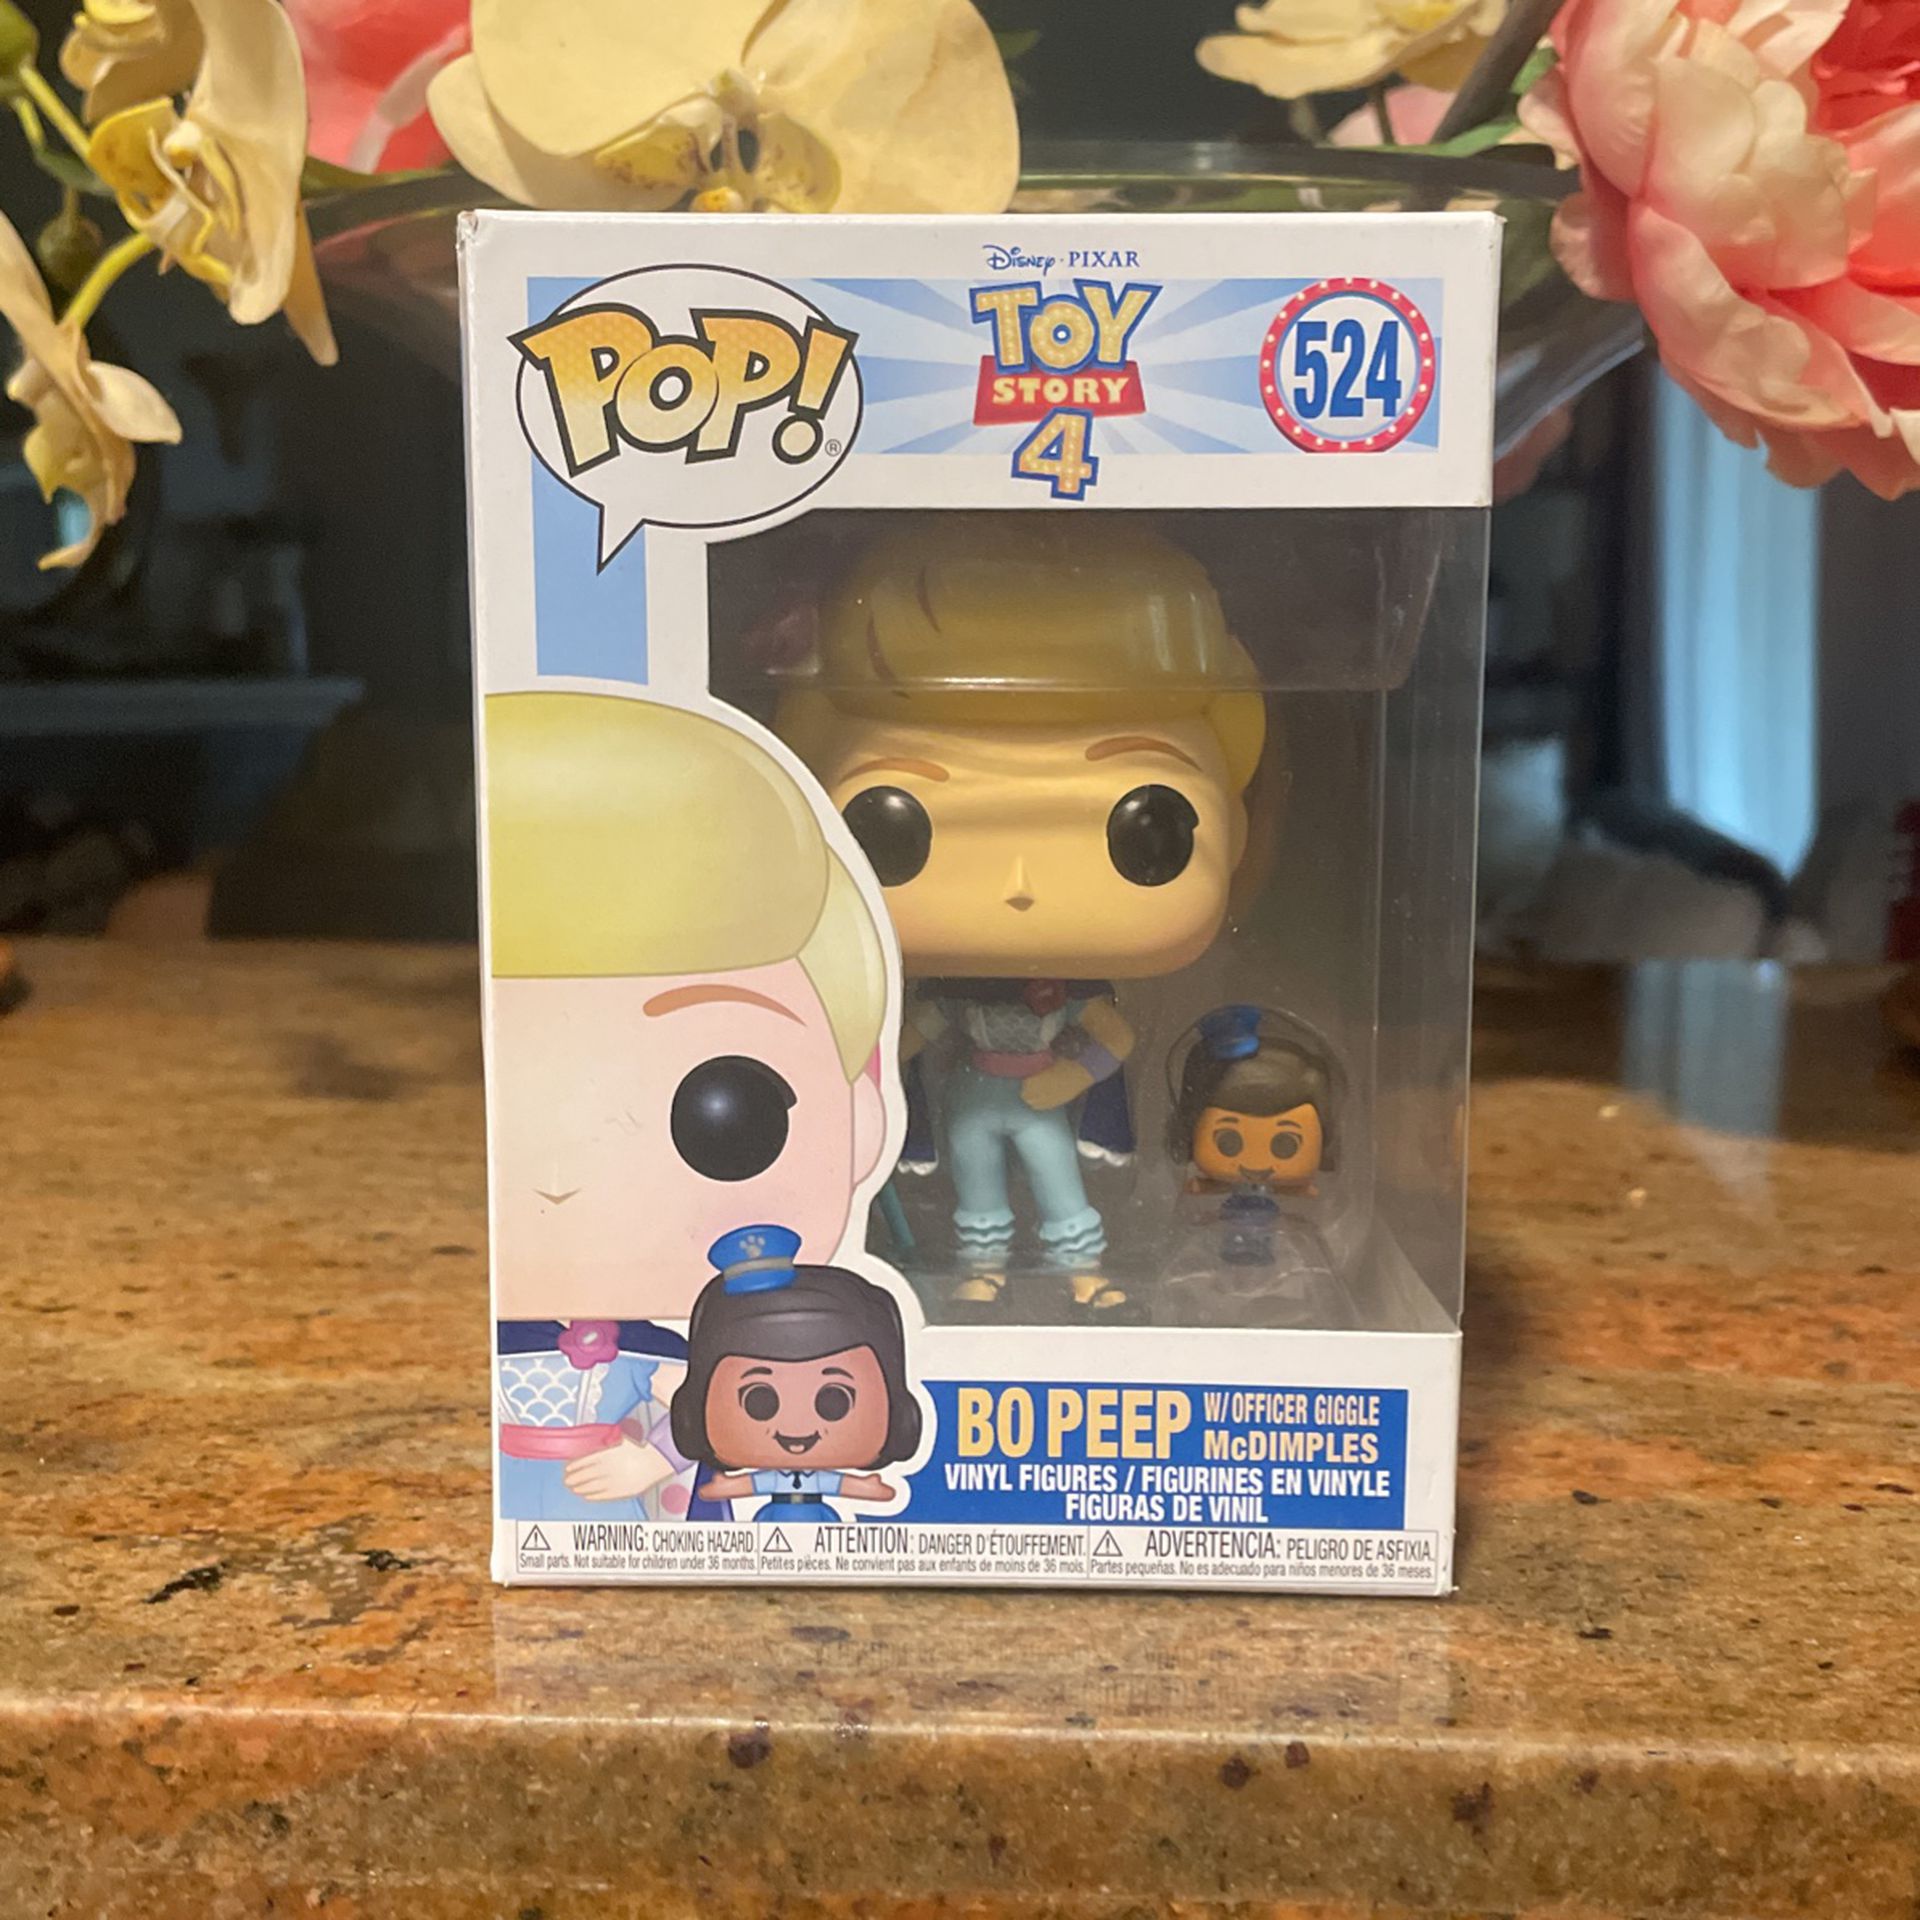 FUNKO POP! Toy Story 4 Bo Peep W/ Officer Giggle McDimples